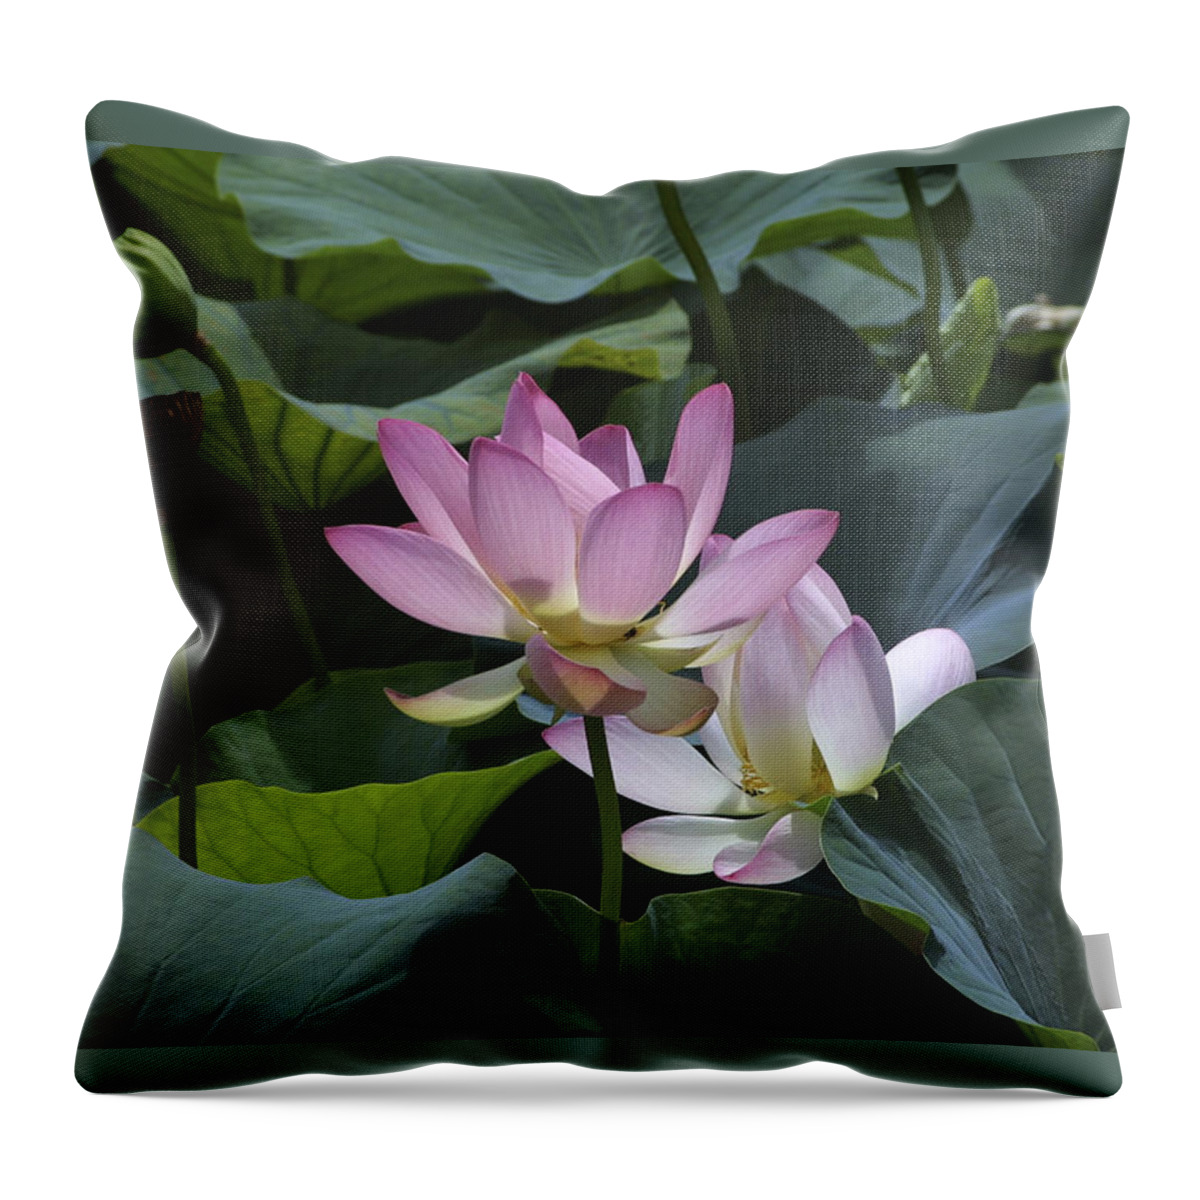 Lotus Throw Pillow featuring the photograph Lotus by Raffaella Lunelli